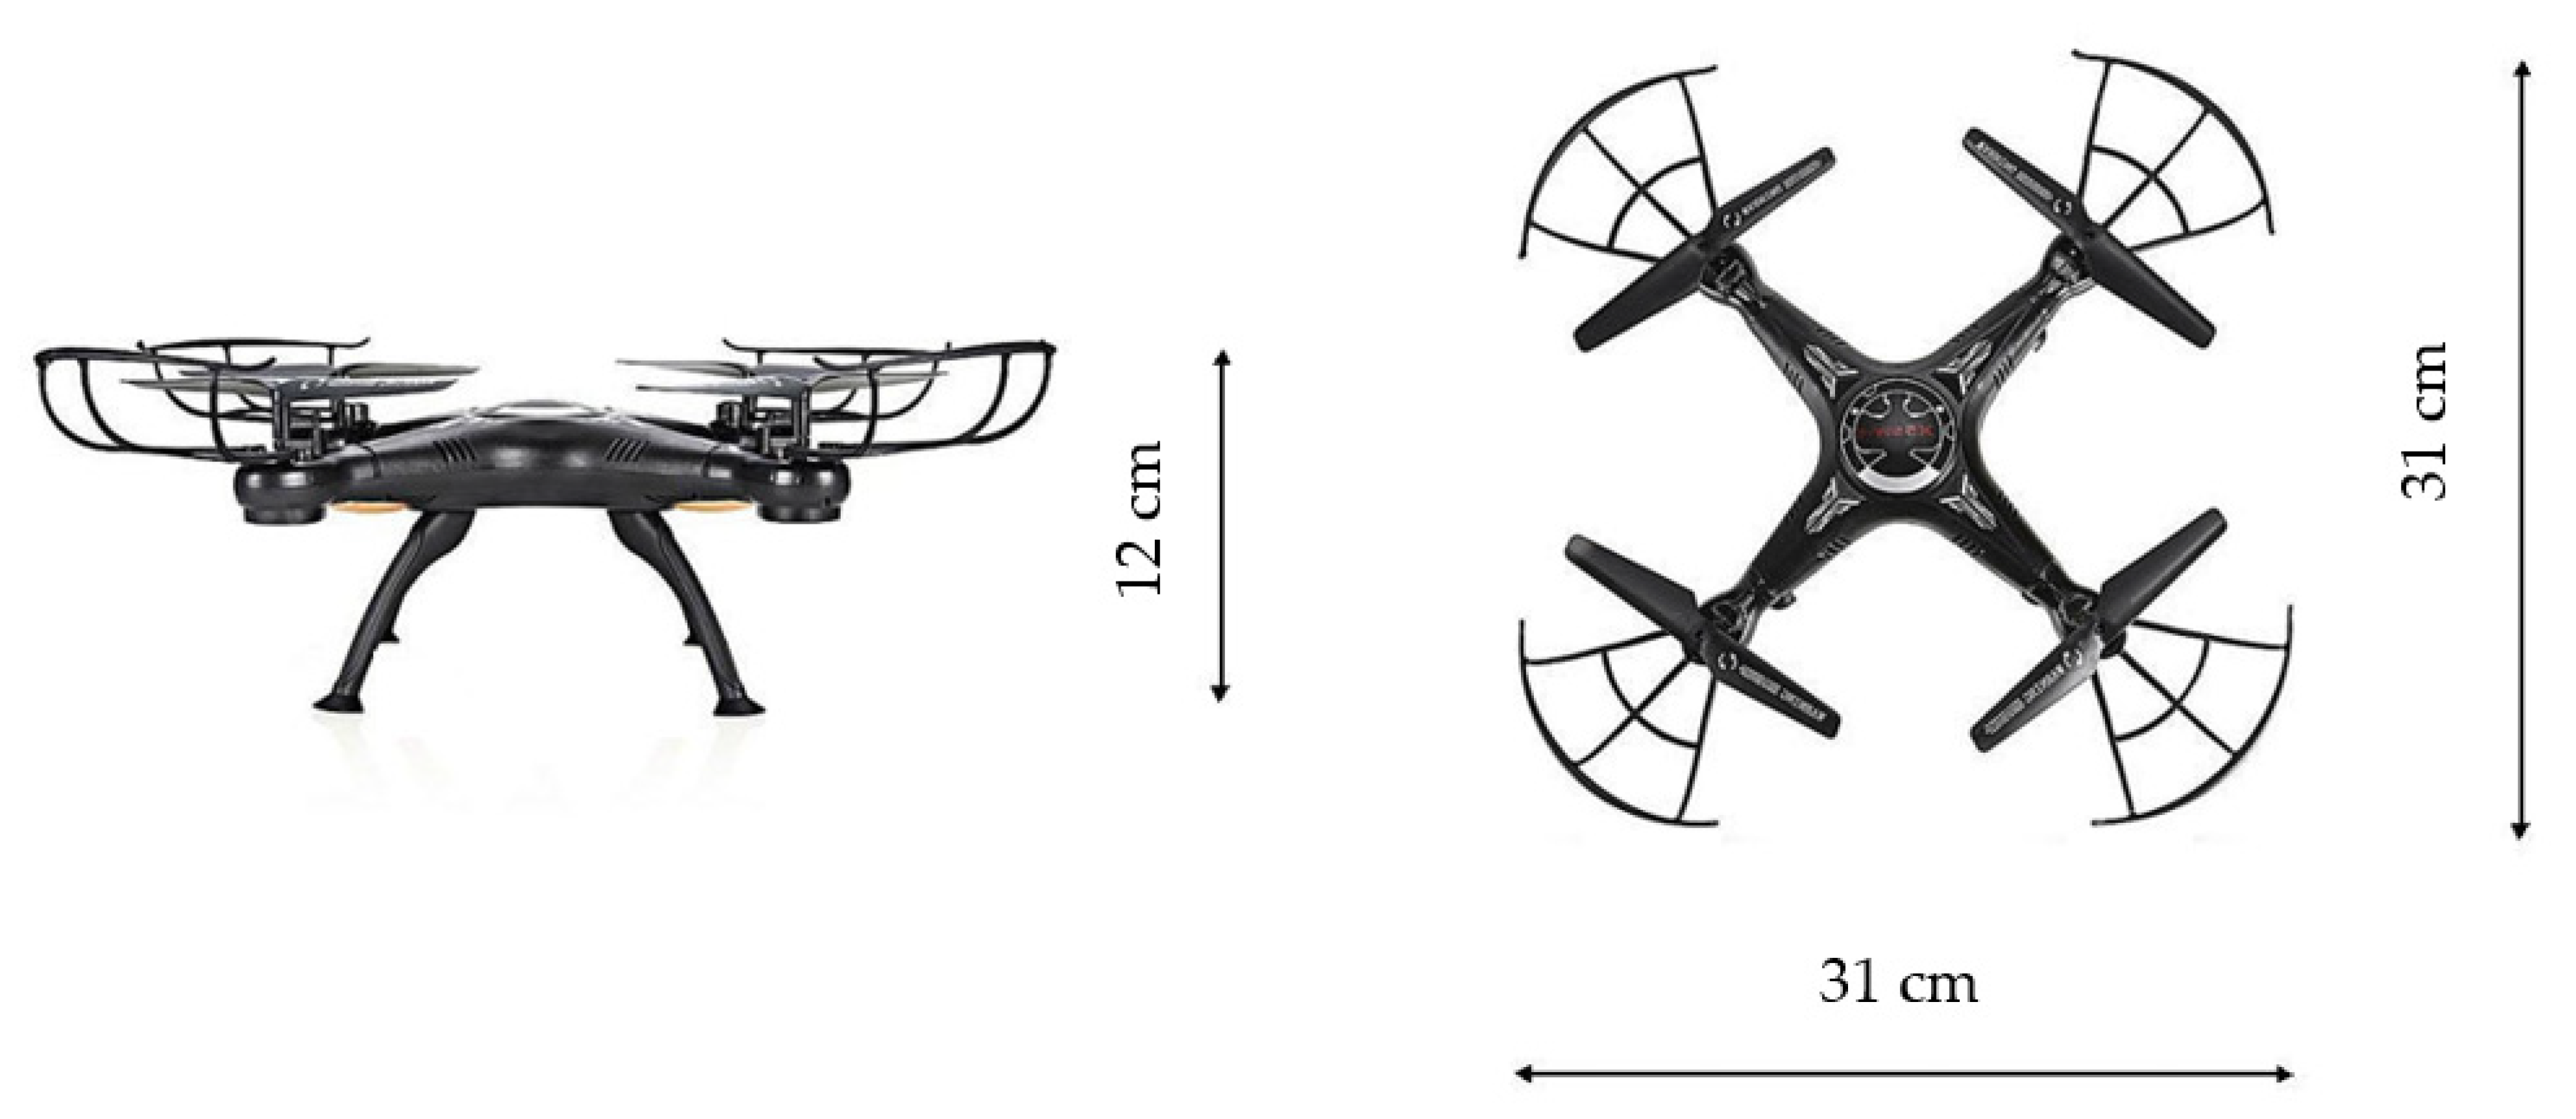 Typical Drone Size Image with dimensions